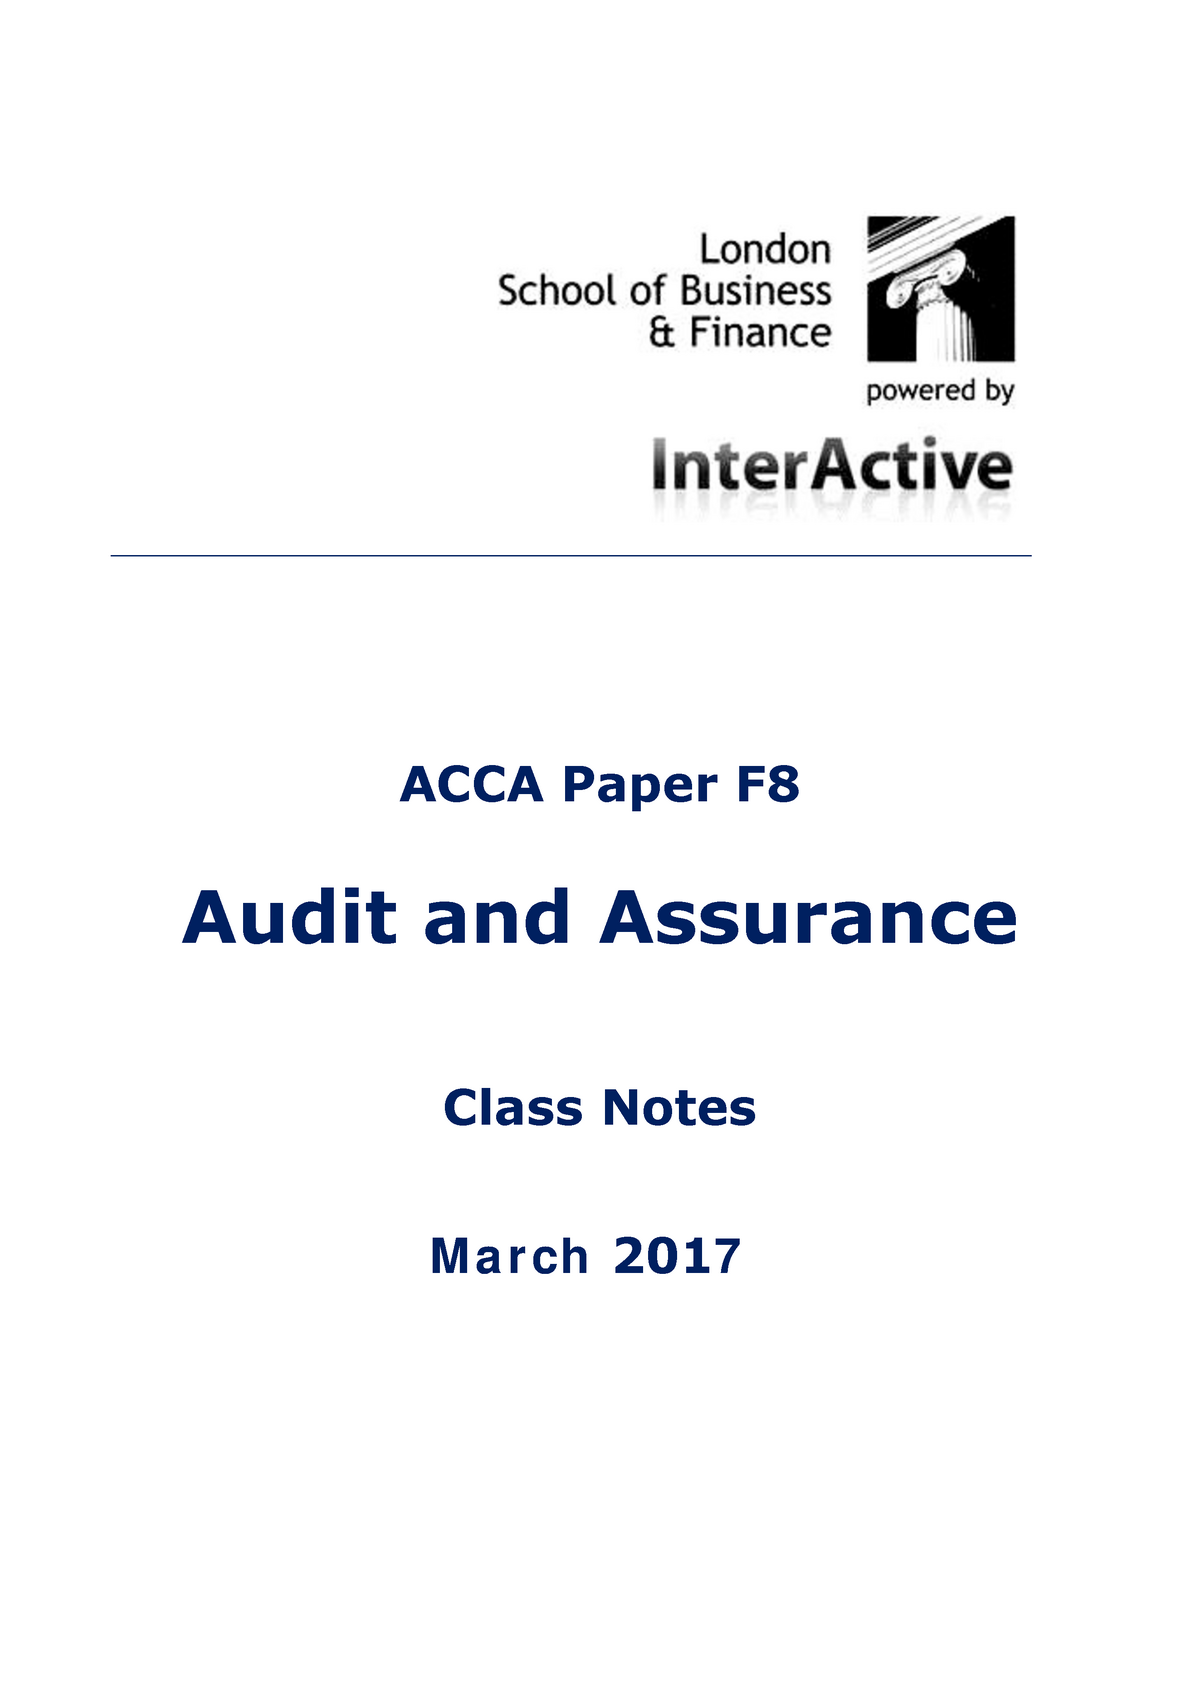 12 Acca paper f8 audit and assurance pdf